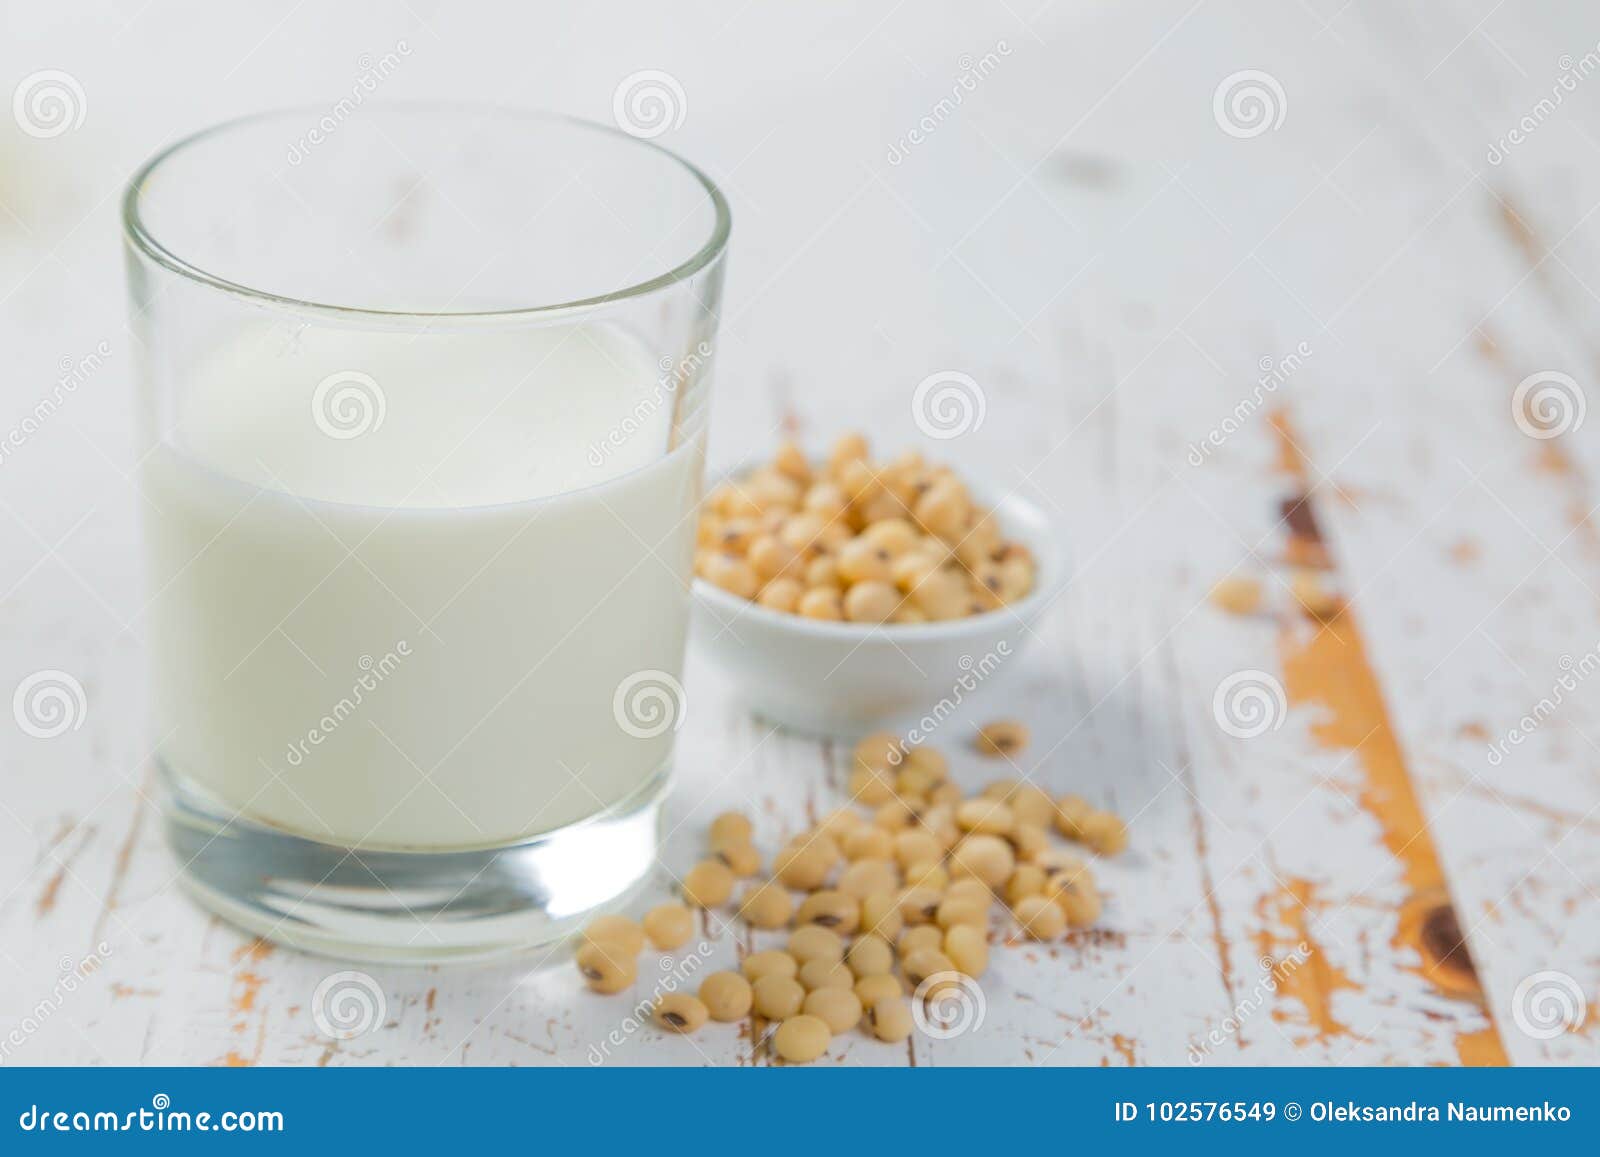 Non-dairy milk - soy stock image. Image of nondairy - 102576549